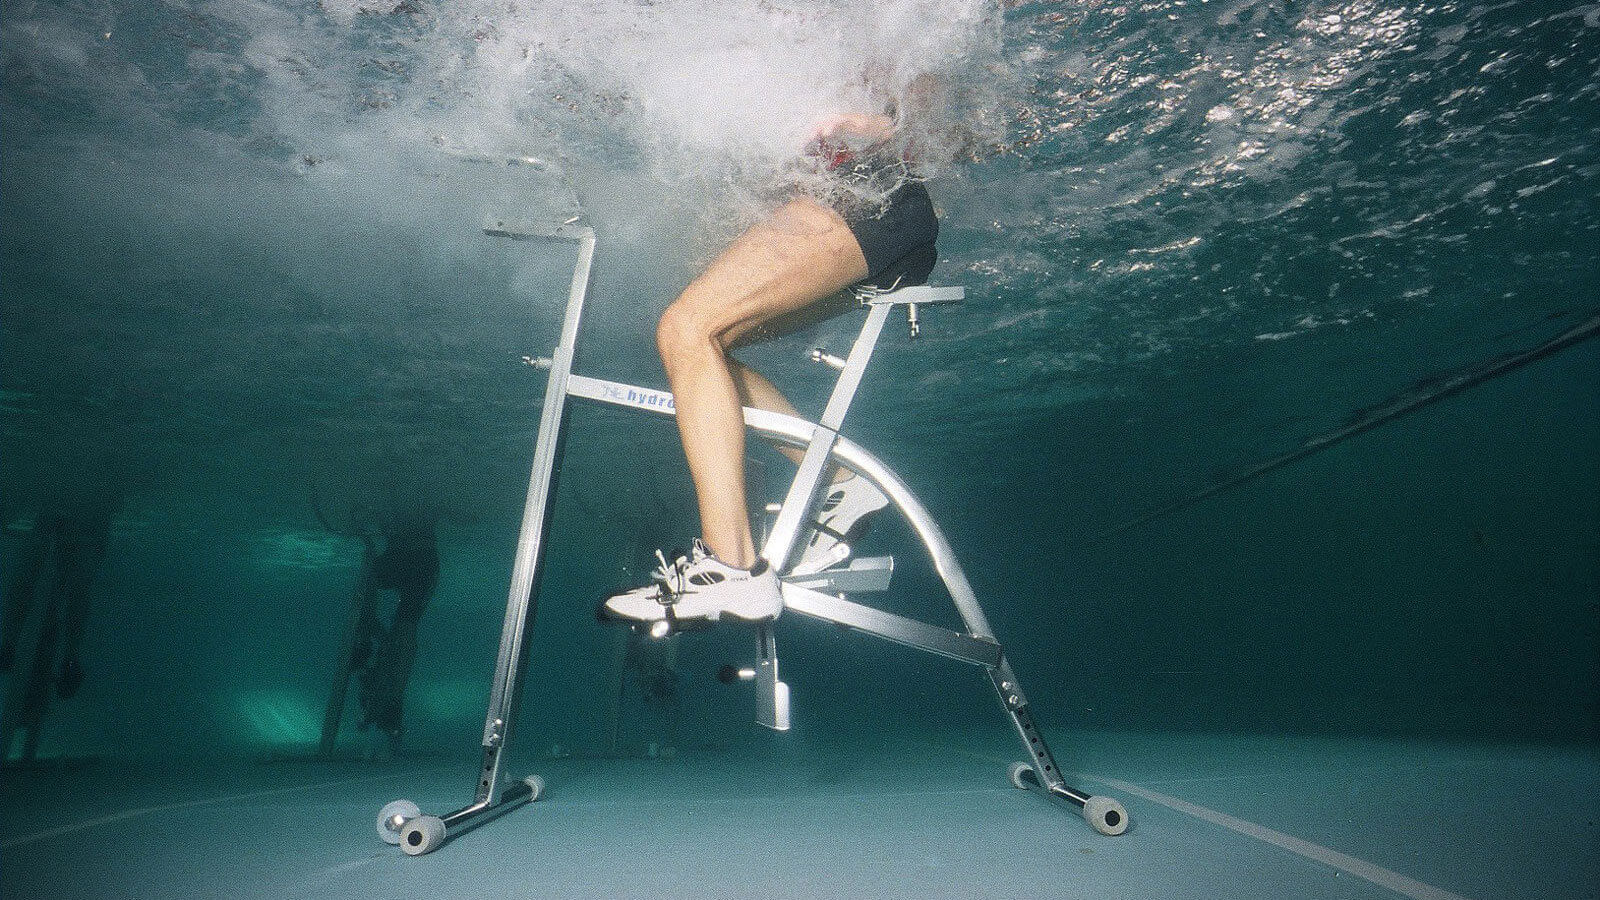 fitness equipment for exercises in the water